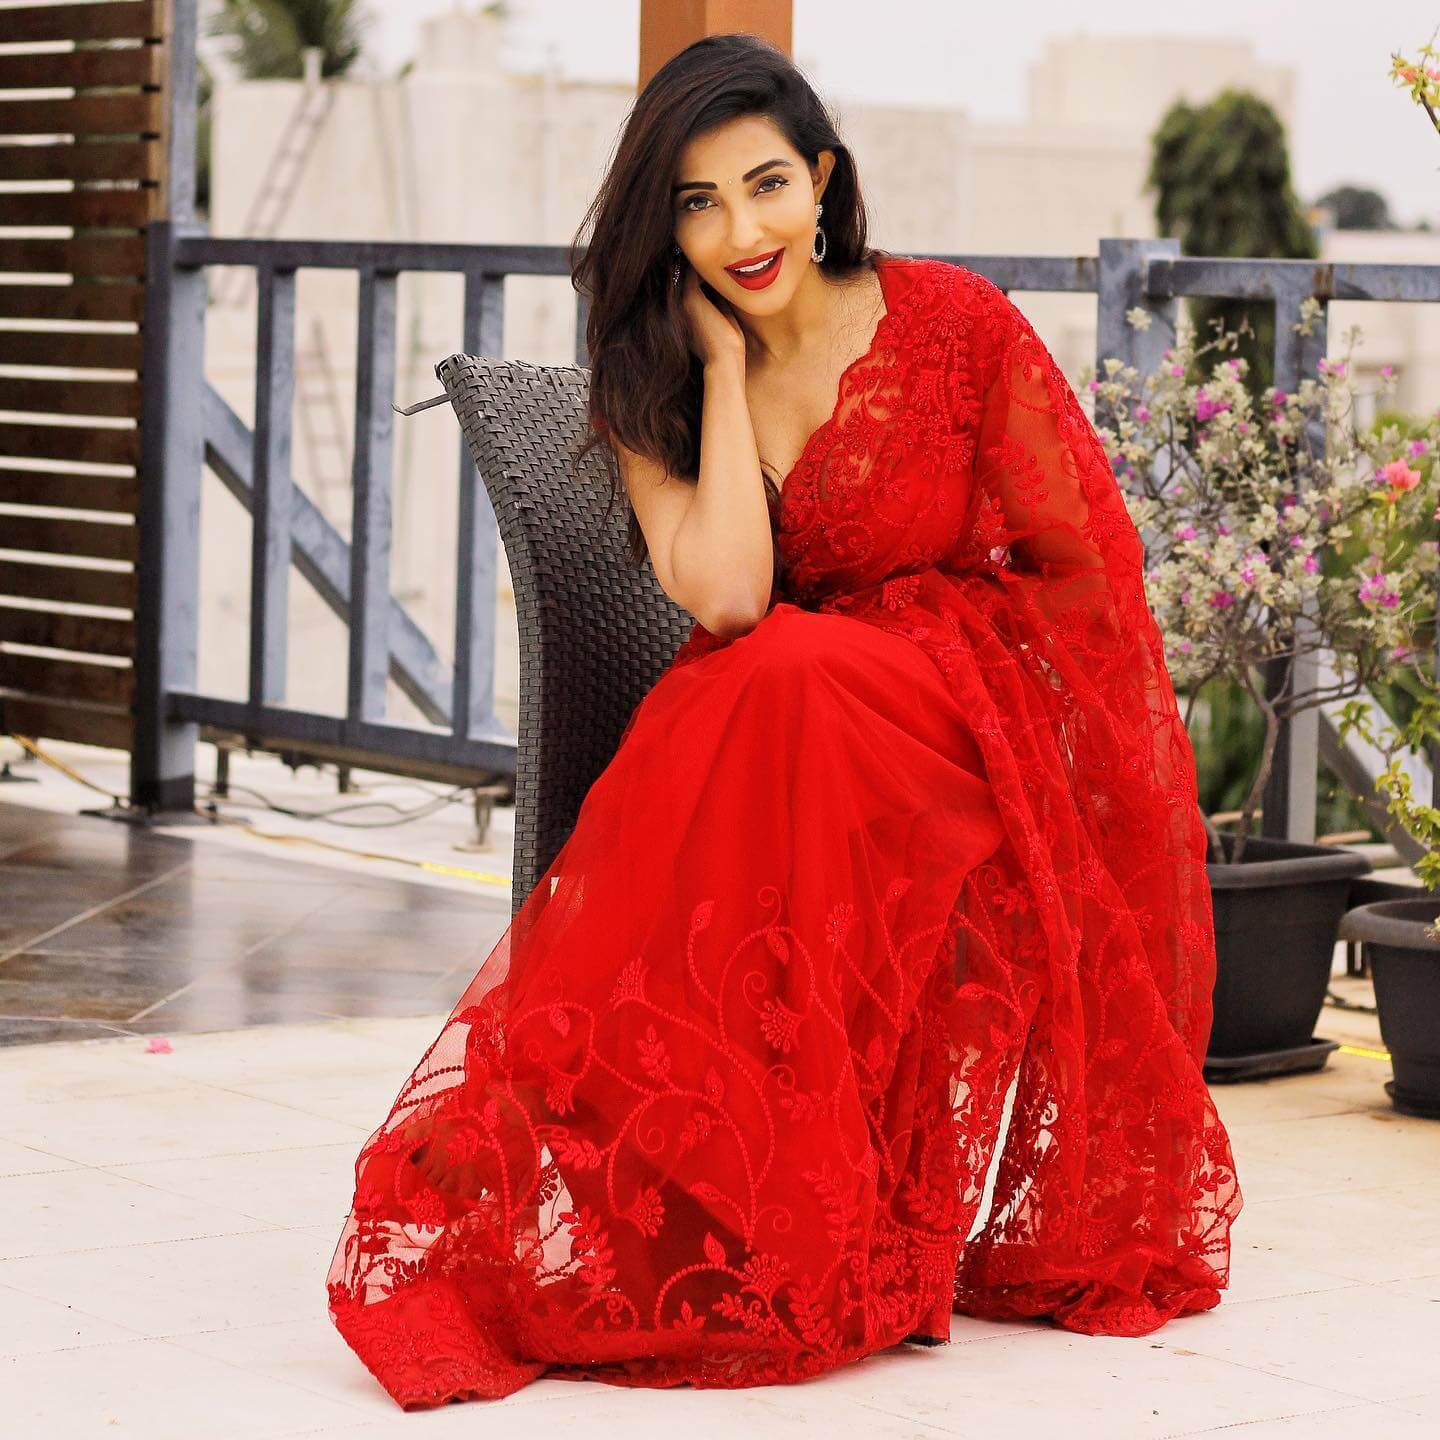 Parvathy Nair Enchantress Look In Red Net Embroidered Saree - Traditional Outfits & Looks